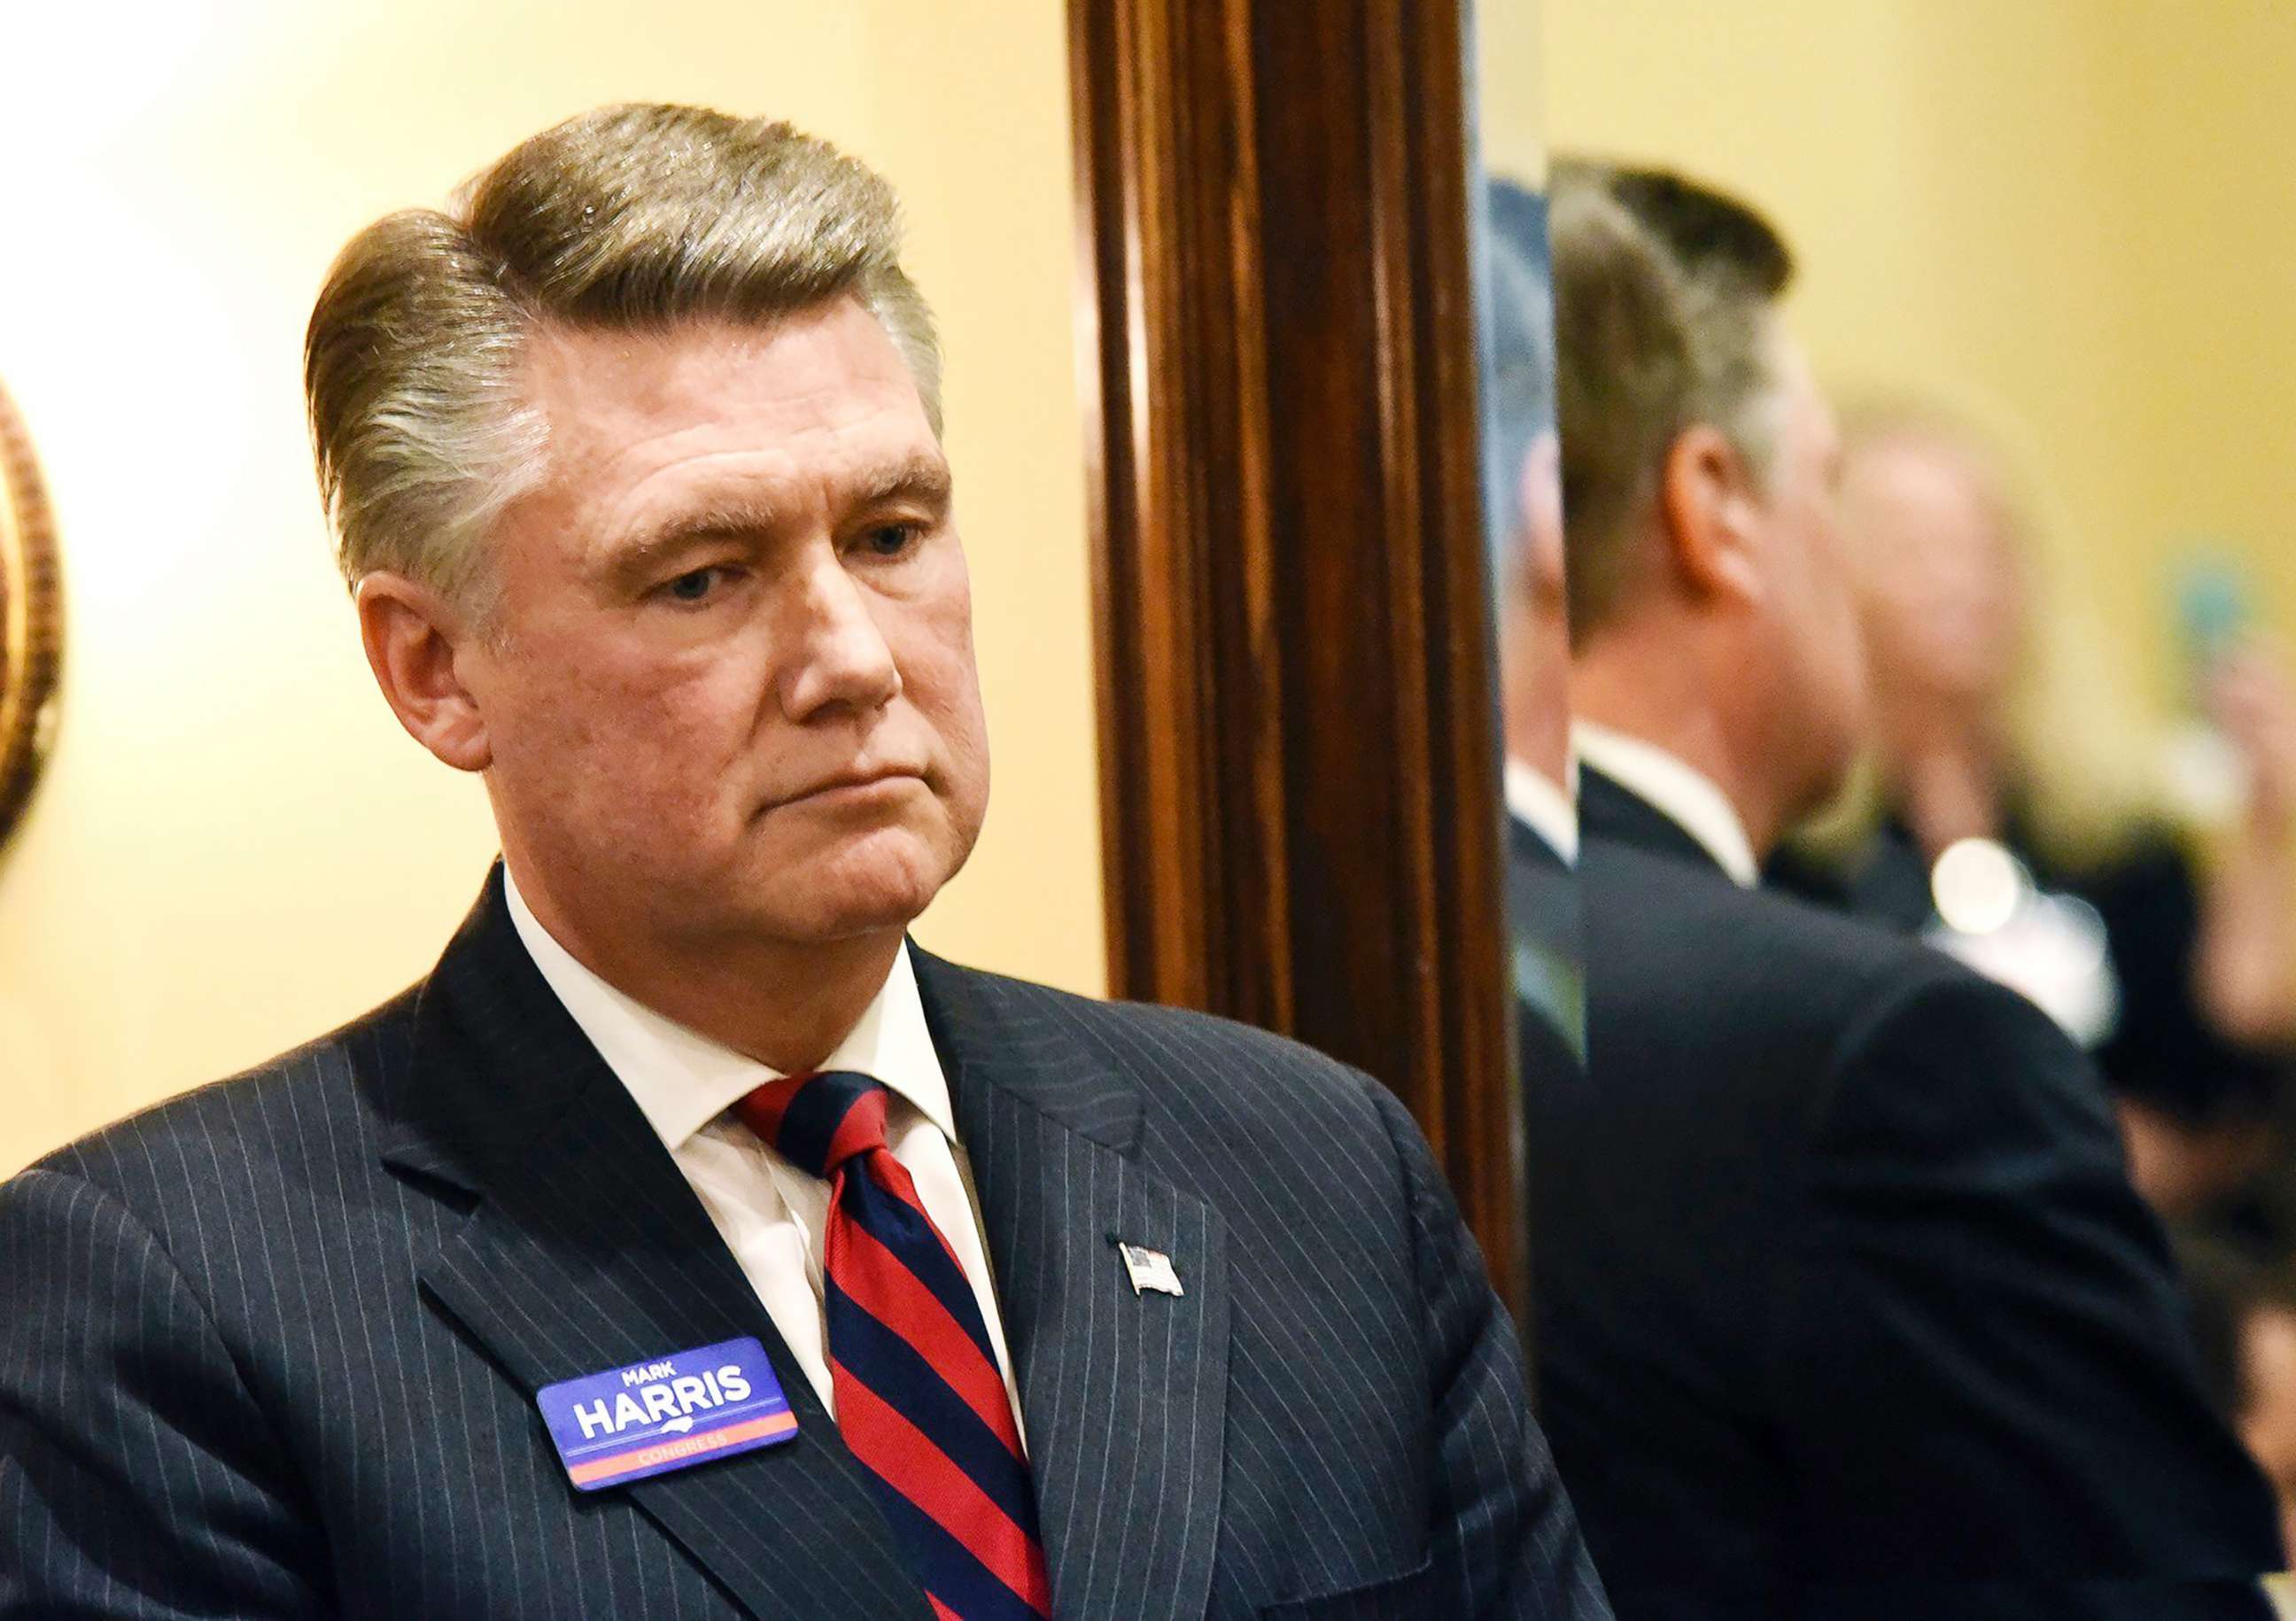 PHOTO: Rev. Mark Harris a congressional candidate in North Carolina's 9th congressional district is pictured on March 21, 2018. 